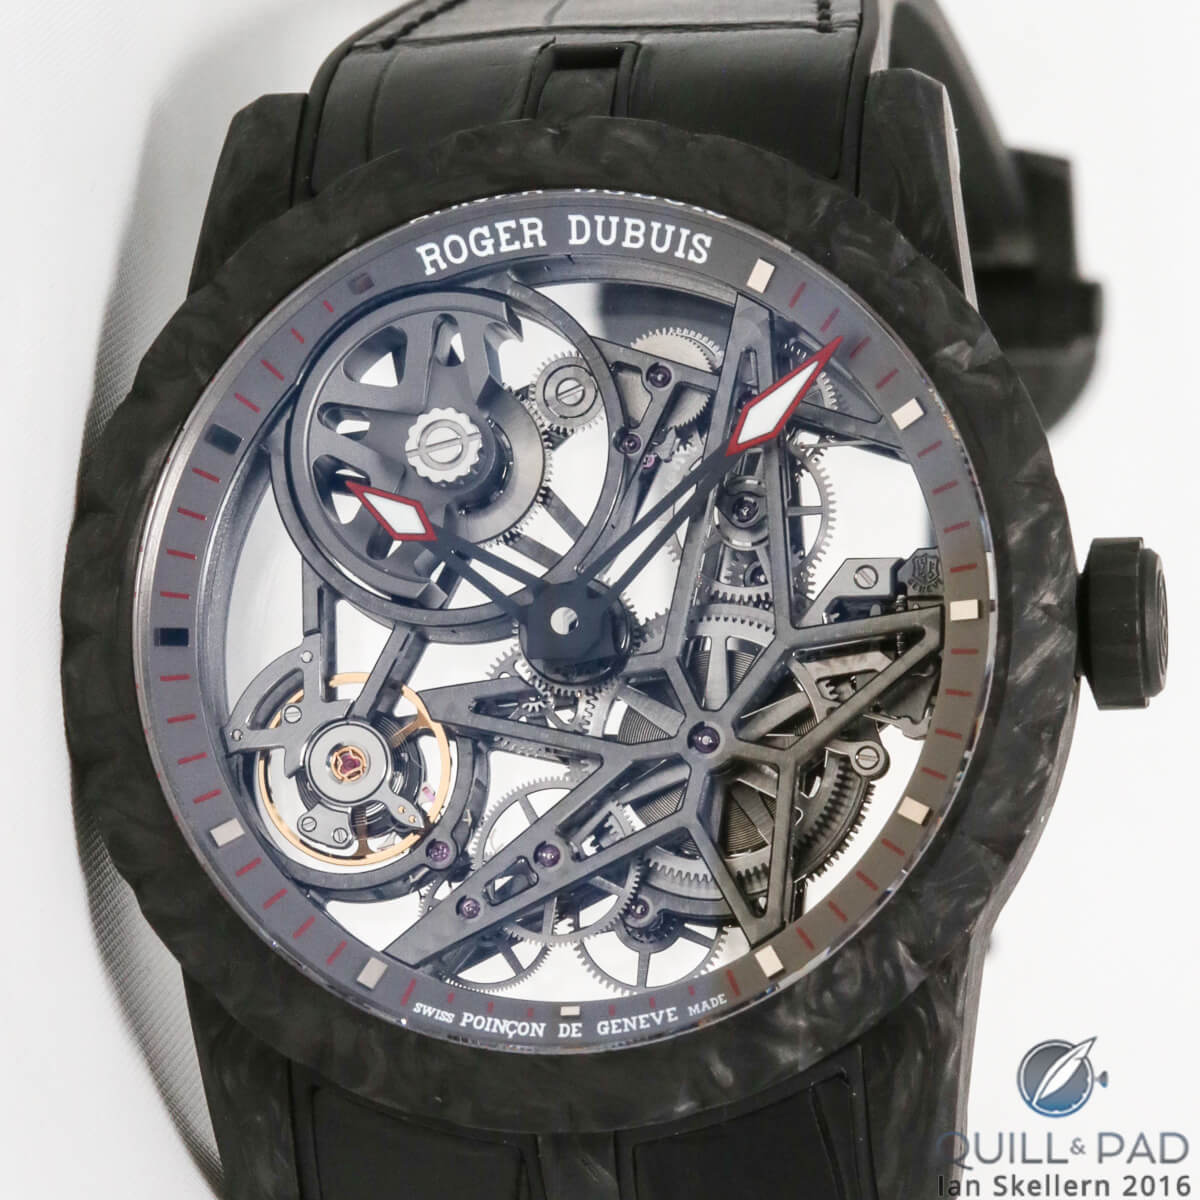 Excalibur Automatic Skeleton Carbon by Roger Dubuis with forged carbon fiber case